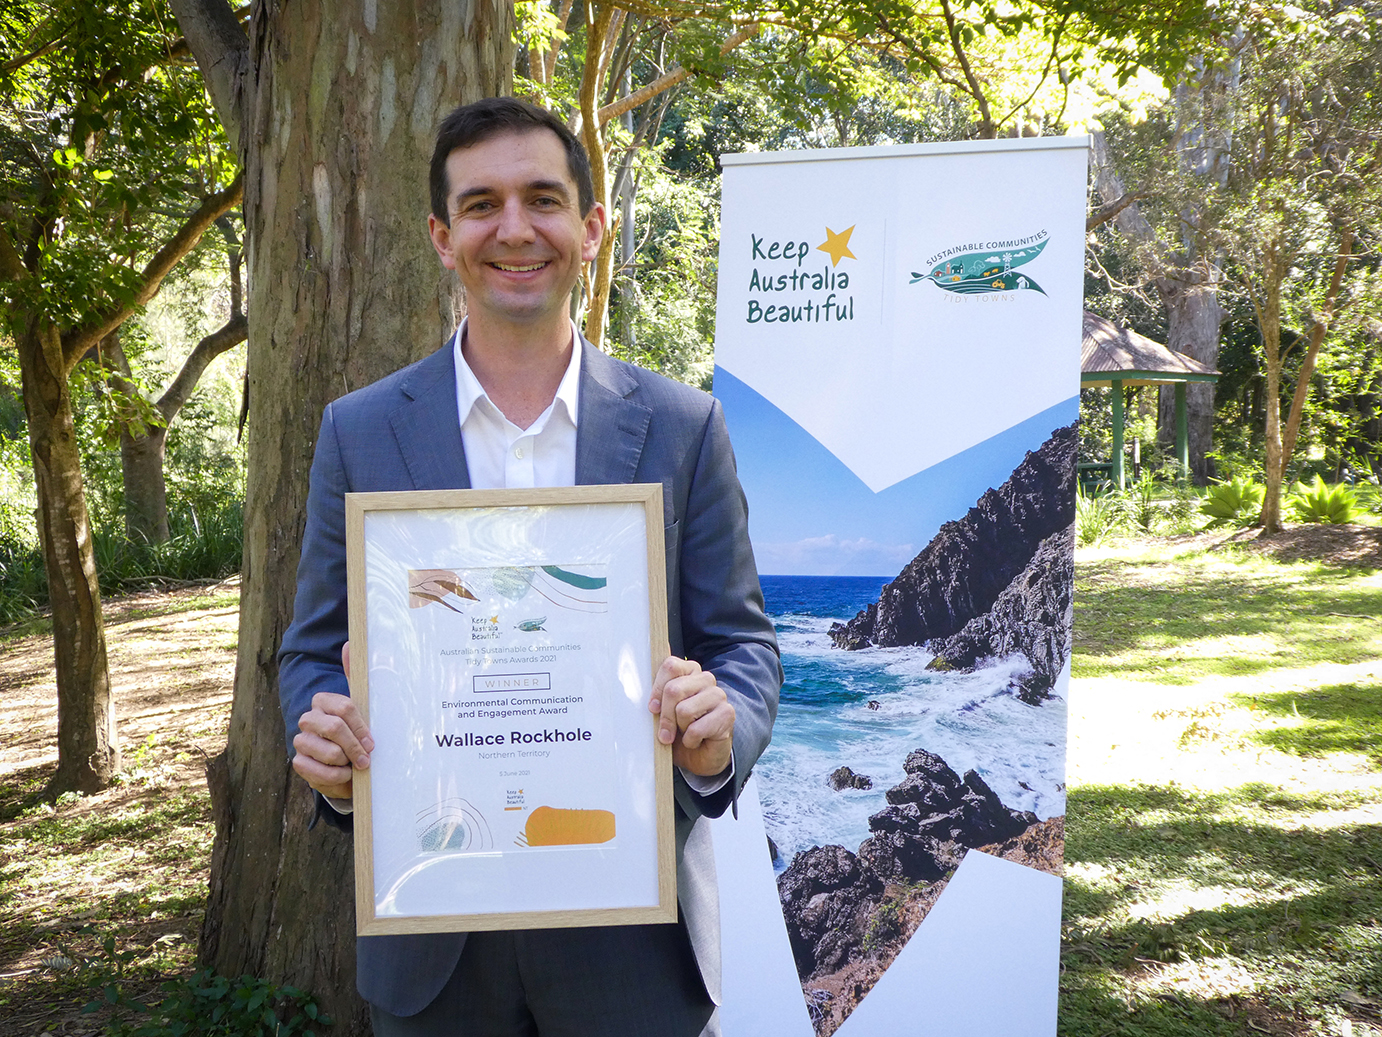 Hon Trevor Evans MP, Assistant Minister for Waste Reduction and Environmental Management with the 2021 Australian Sustainable Communities Tidy Towns Environmental Sustainability - Natural Environment Management Award presented to Rockhampton, Qld